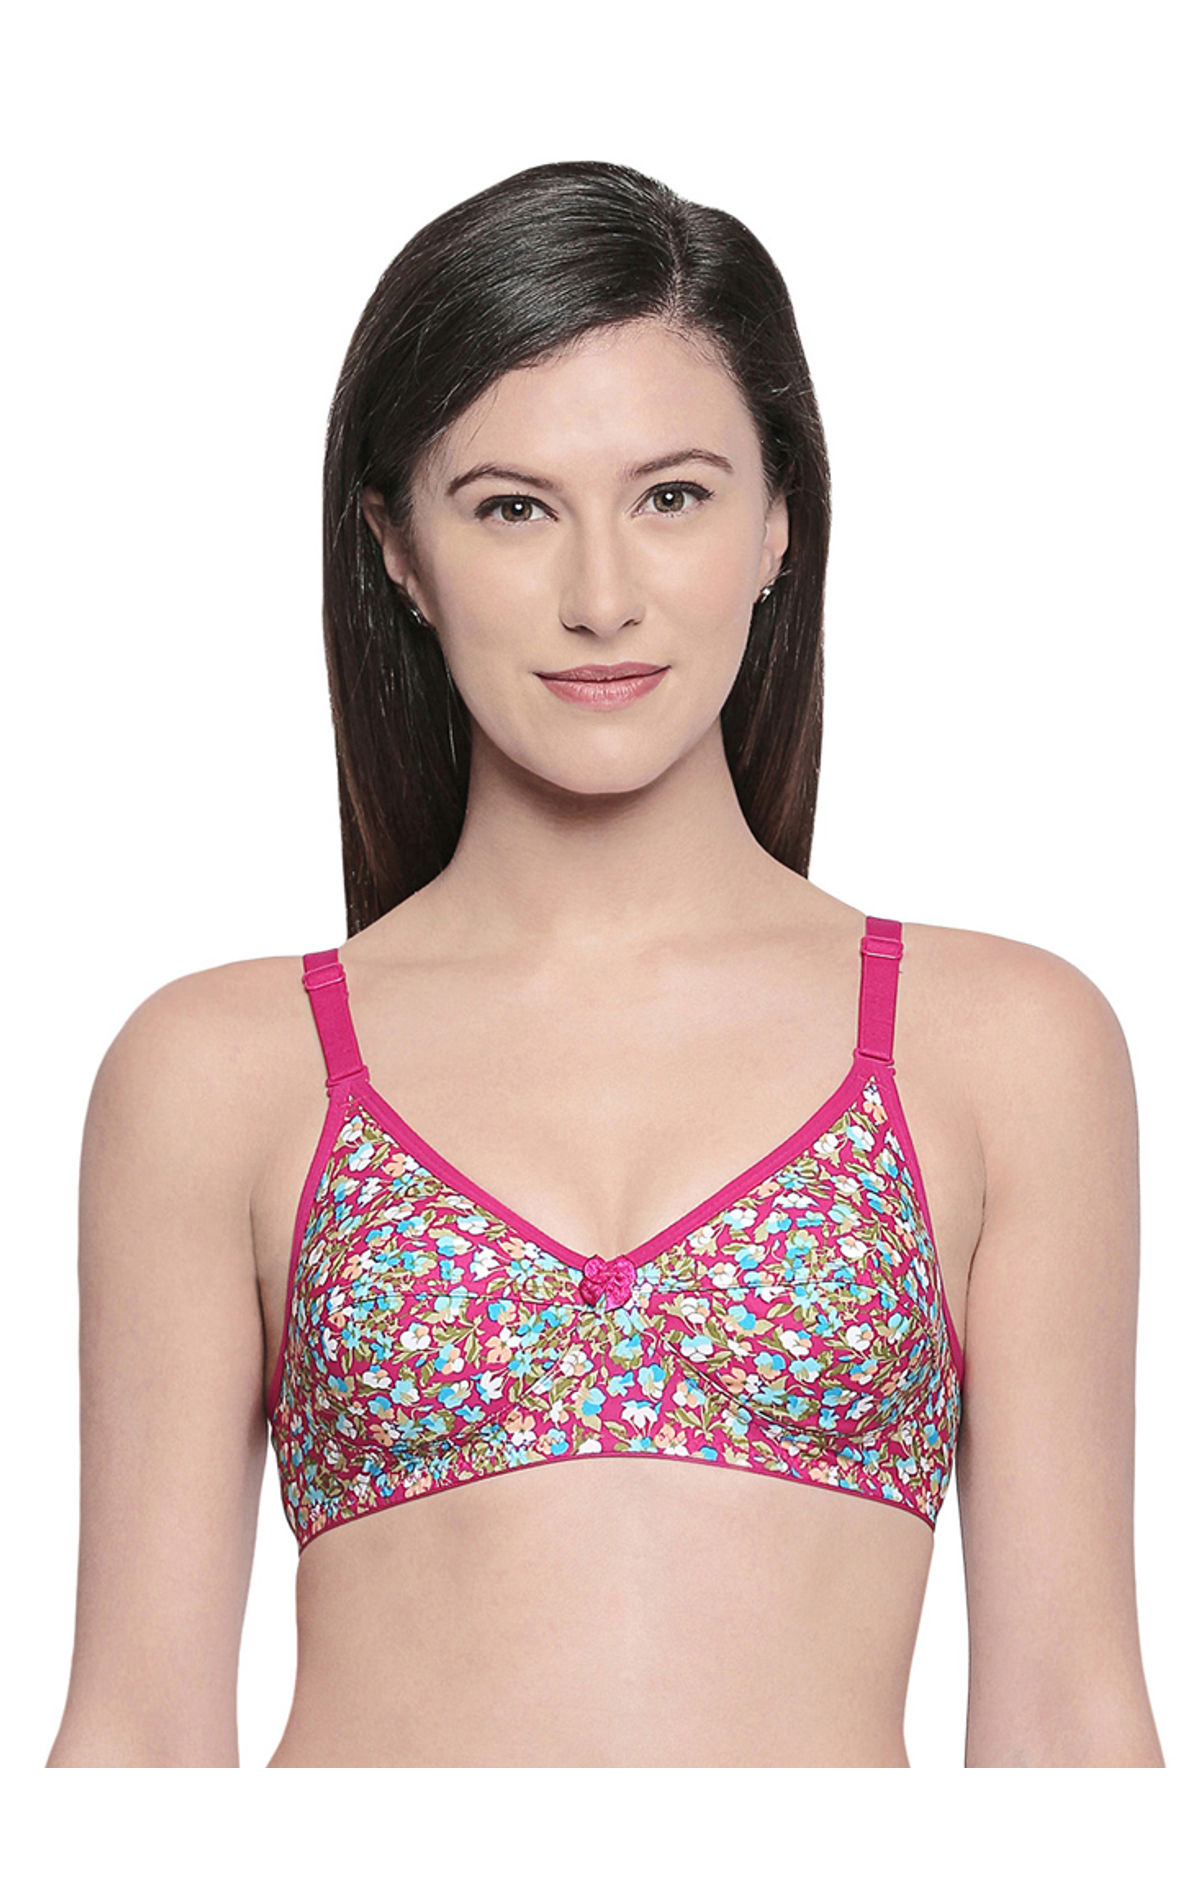 Perfect Coverage Bra 1pc Pack - Assorted Colors-1554